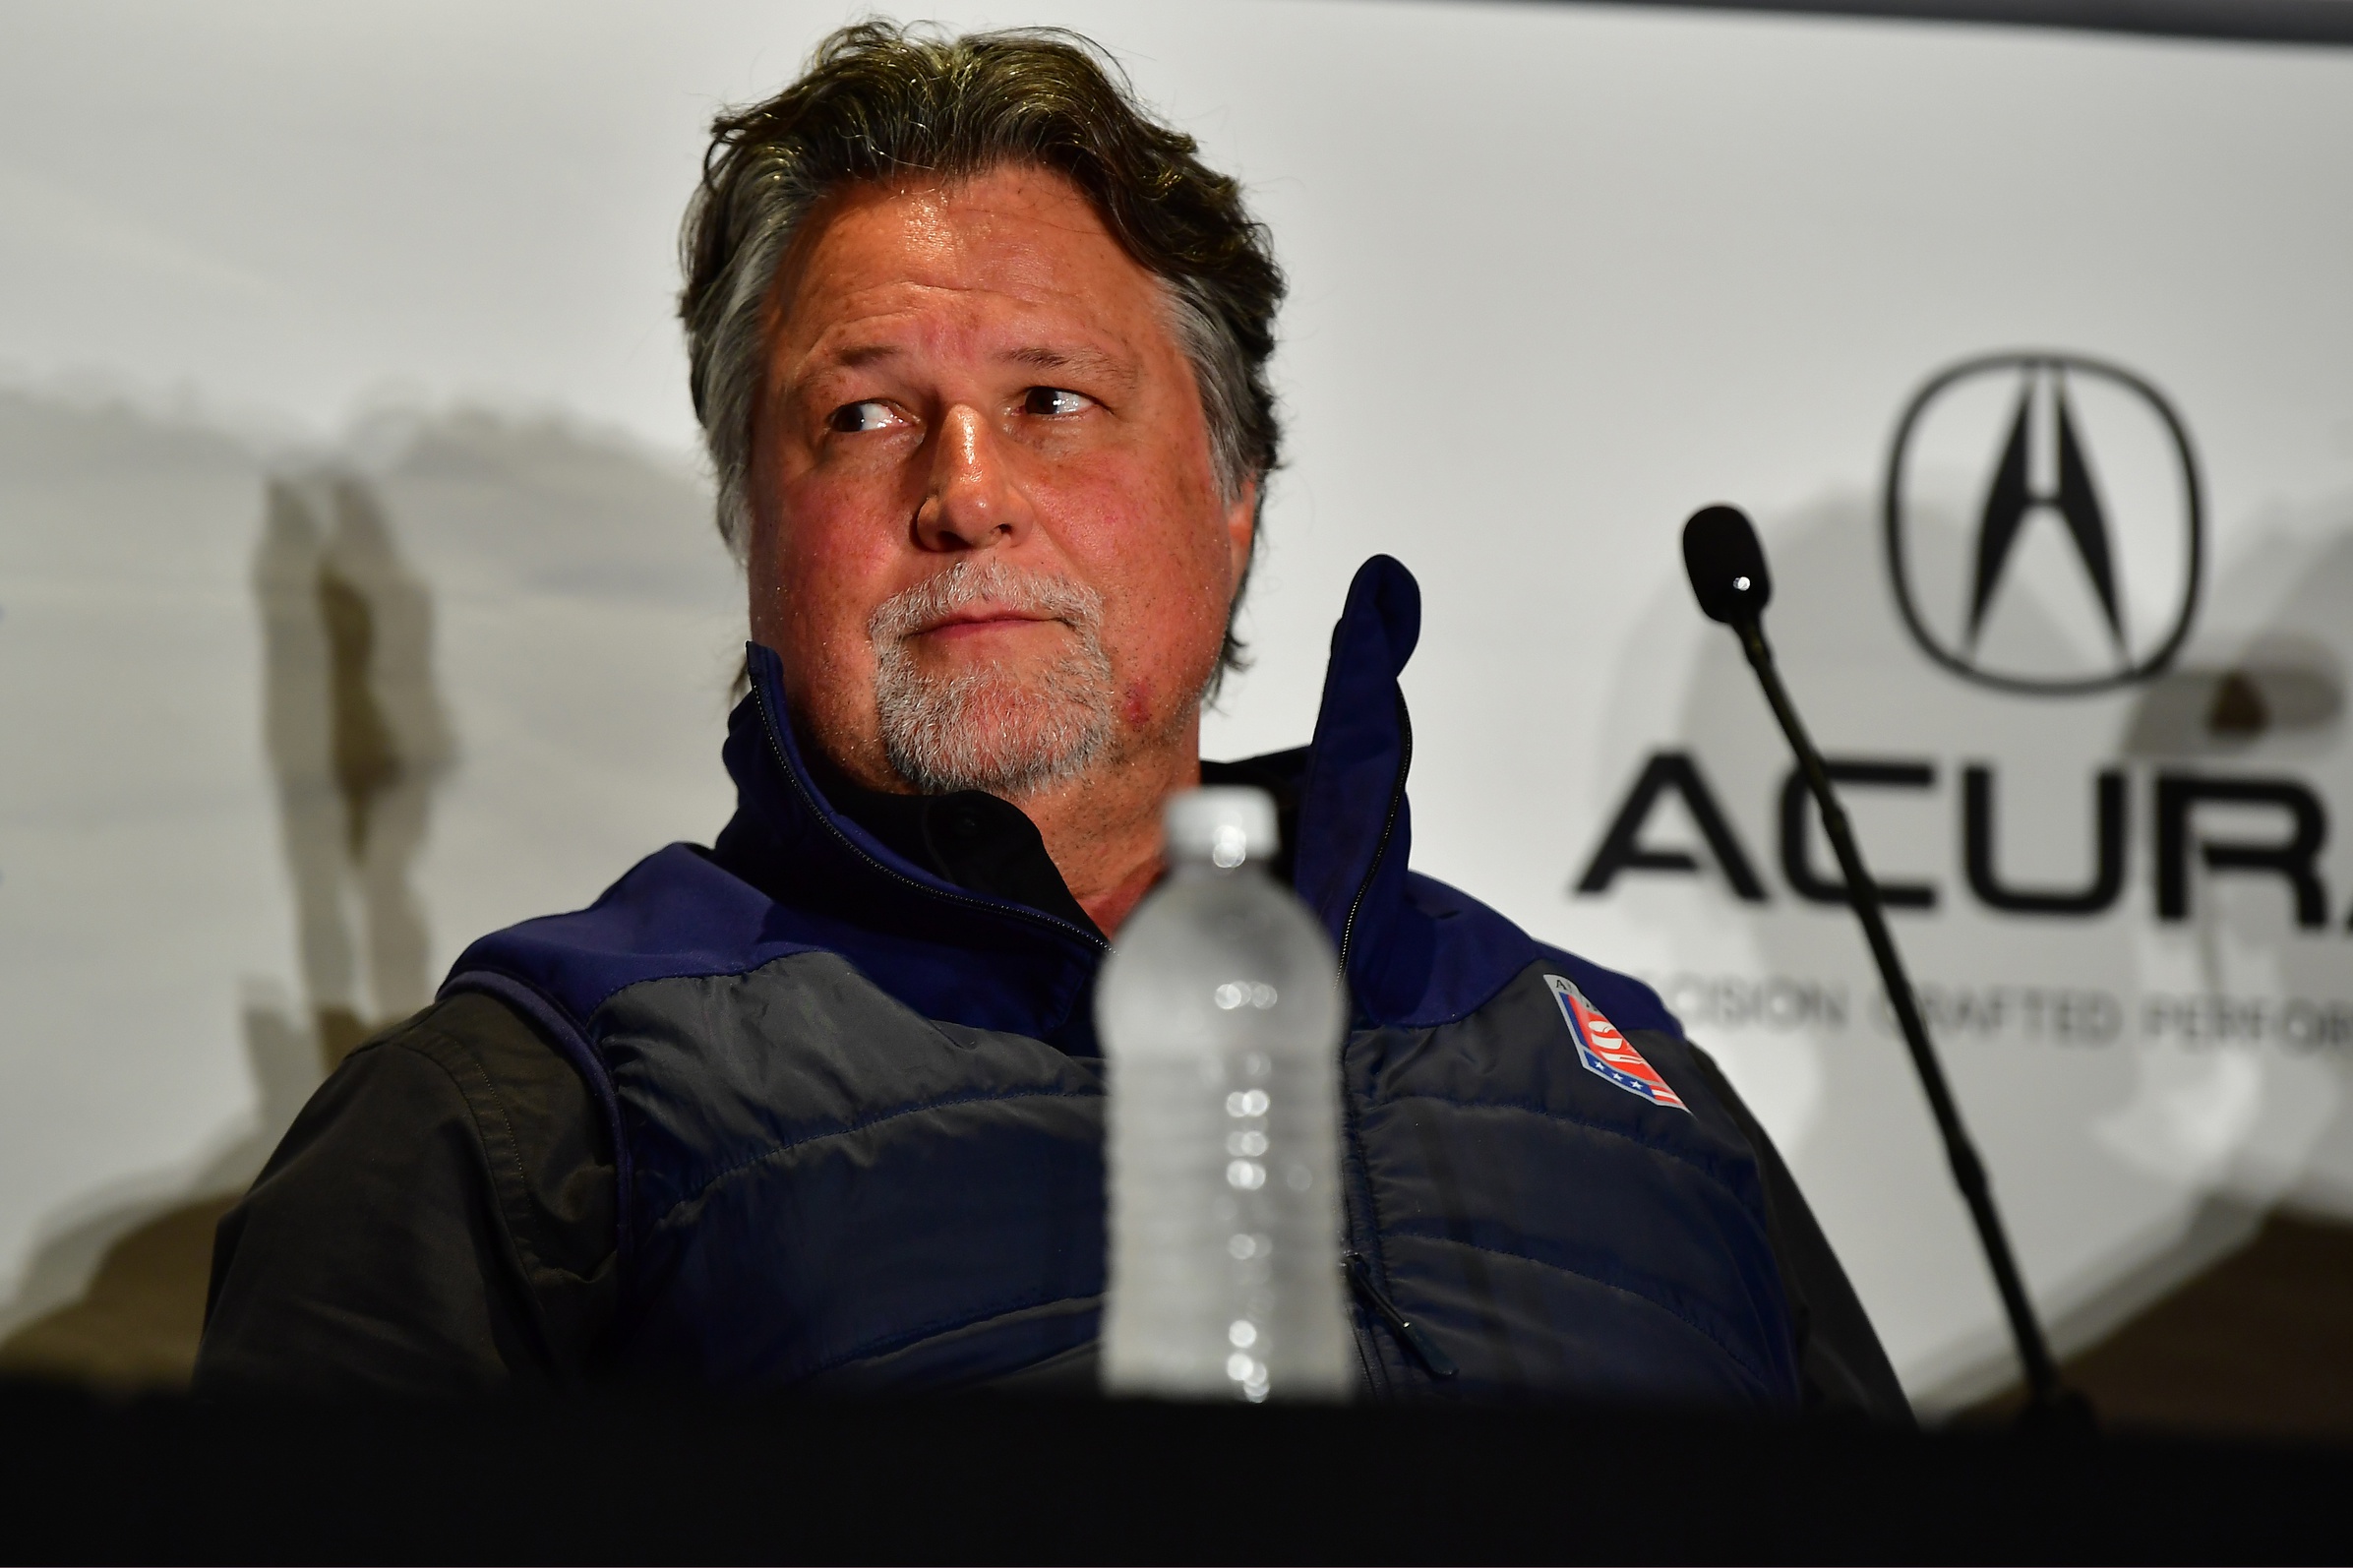 Apr 15, 2023; Long Beach, California, USA; Team owner Michael Andretti speaks with media after Andretti Autosport driver Kyle Kirkwood (27) of United States wins pole position during qualifying at Long Beach Street Circuit. Mandatory Credit: Gary A. Vasquez-USA TODAY Sports